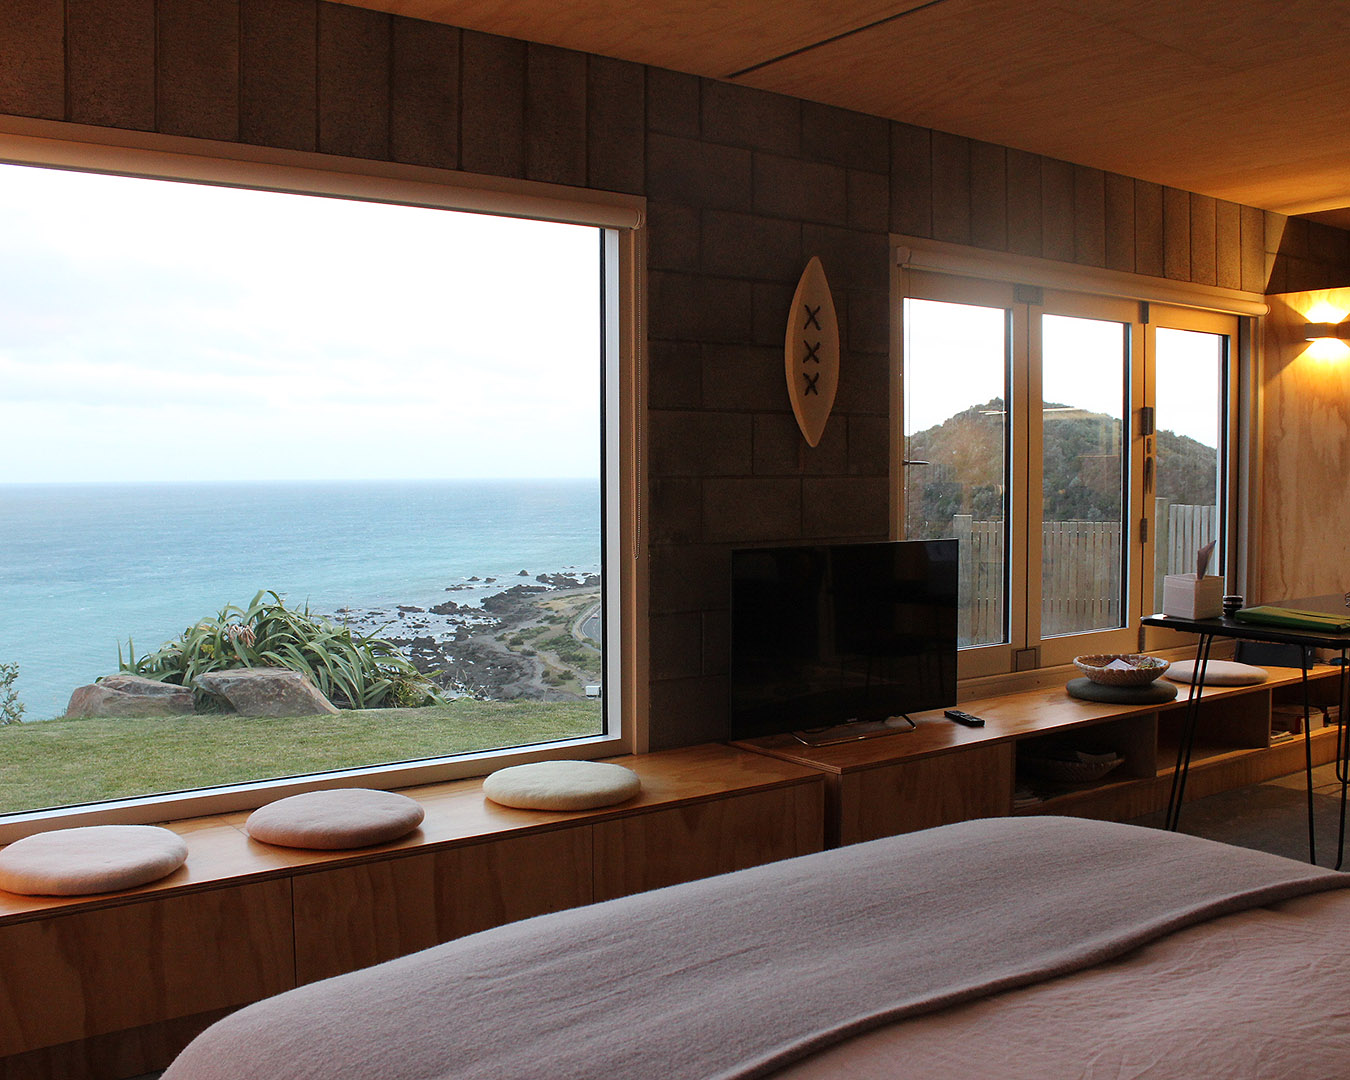 A room looks out onto the sea at this stunning seaview apartment.